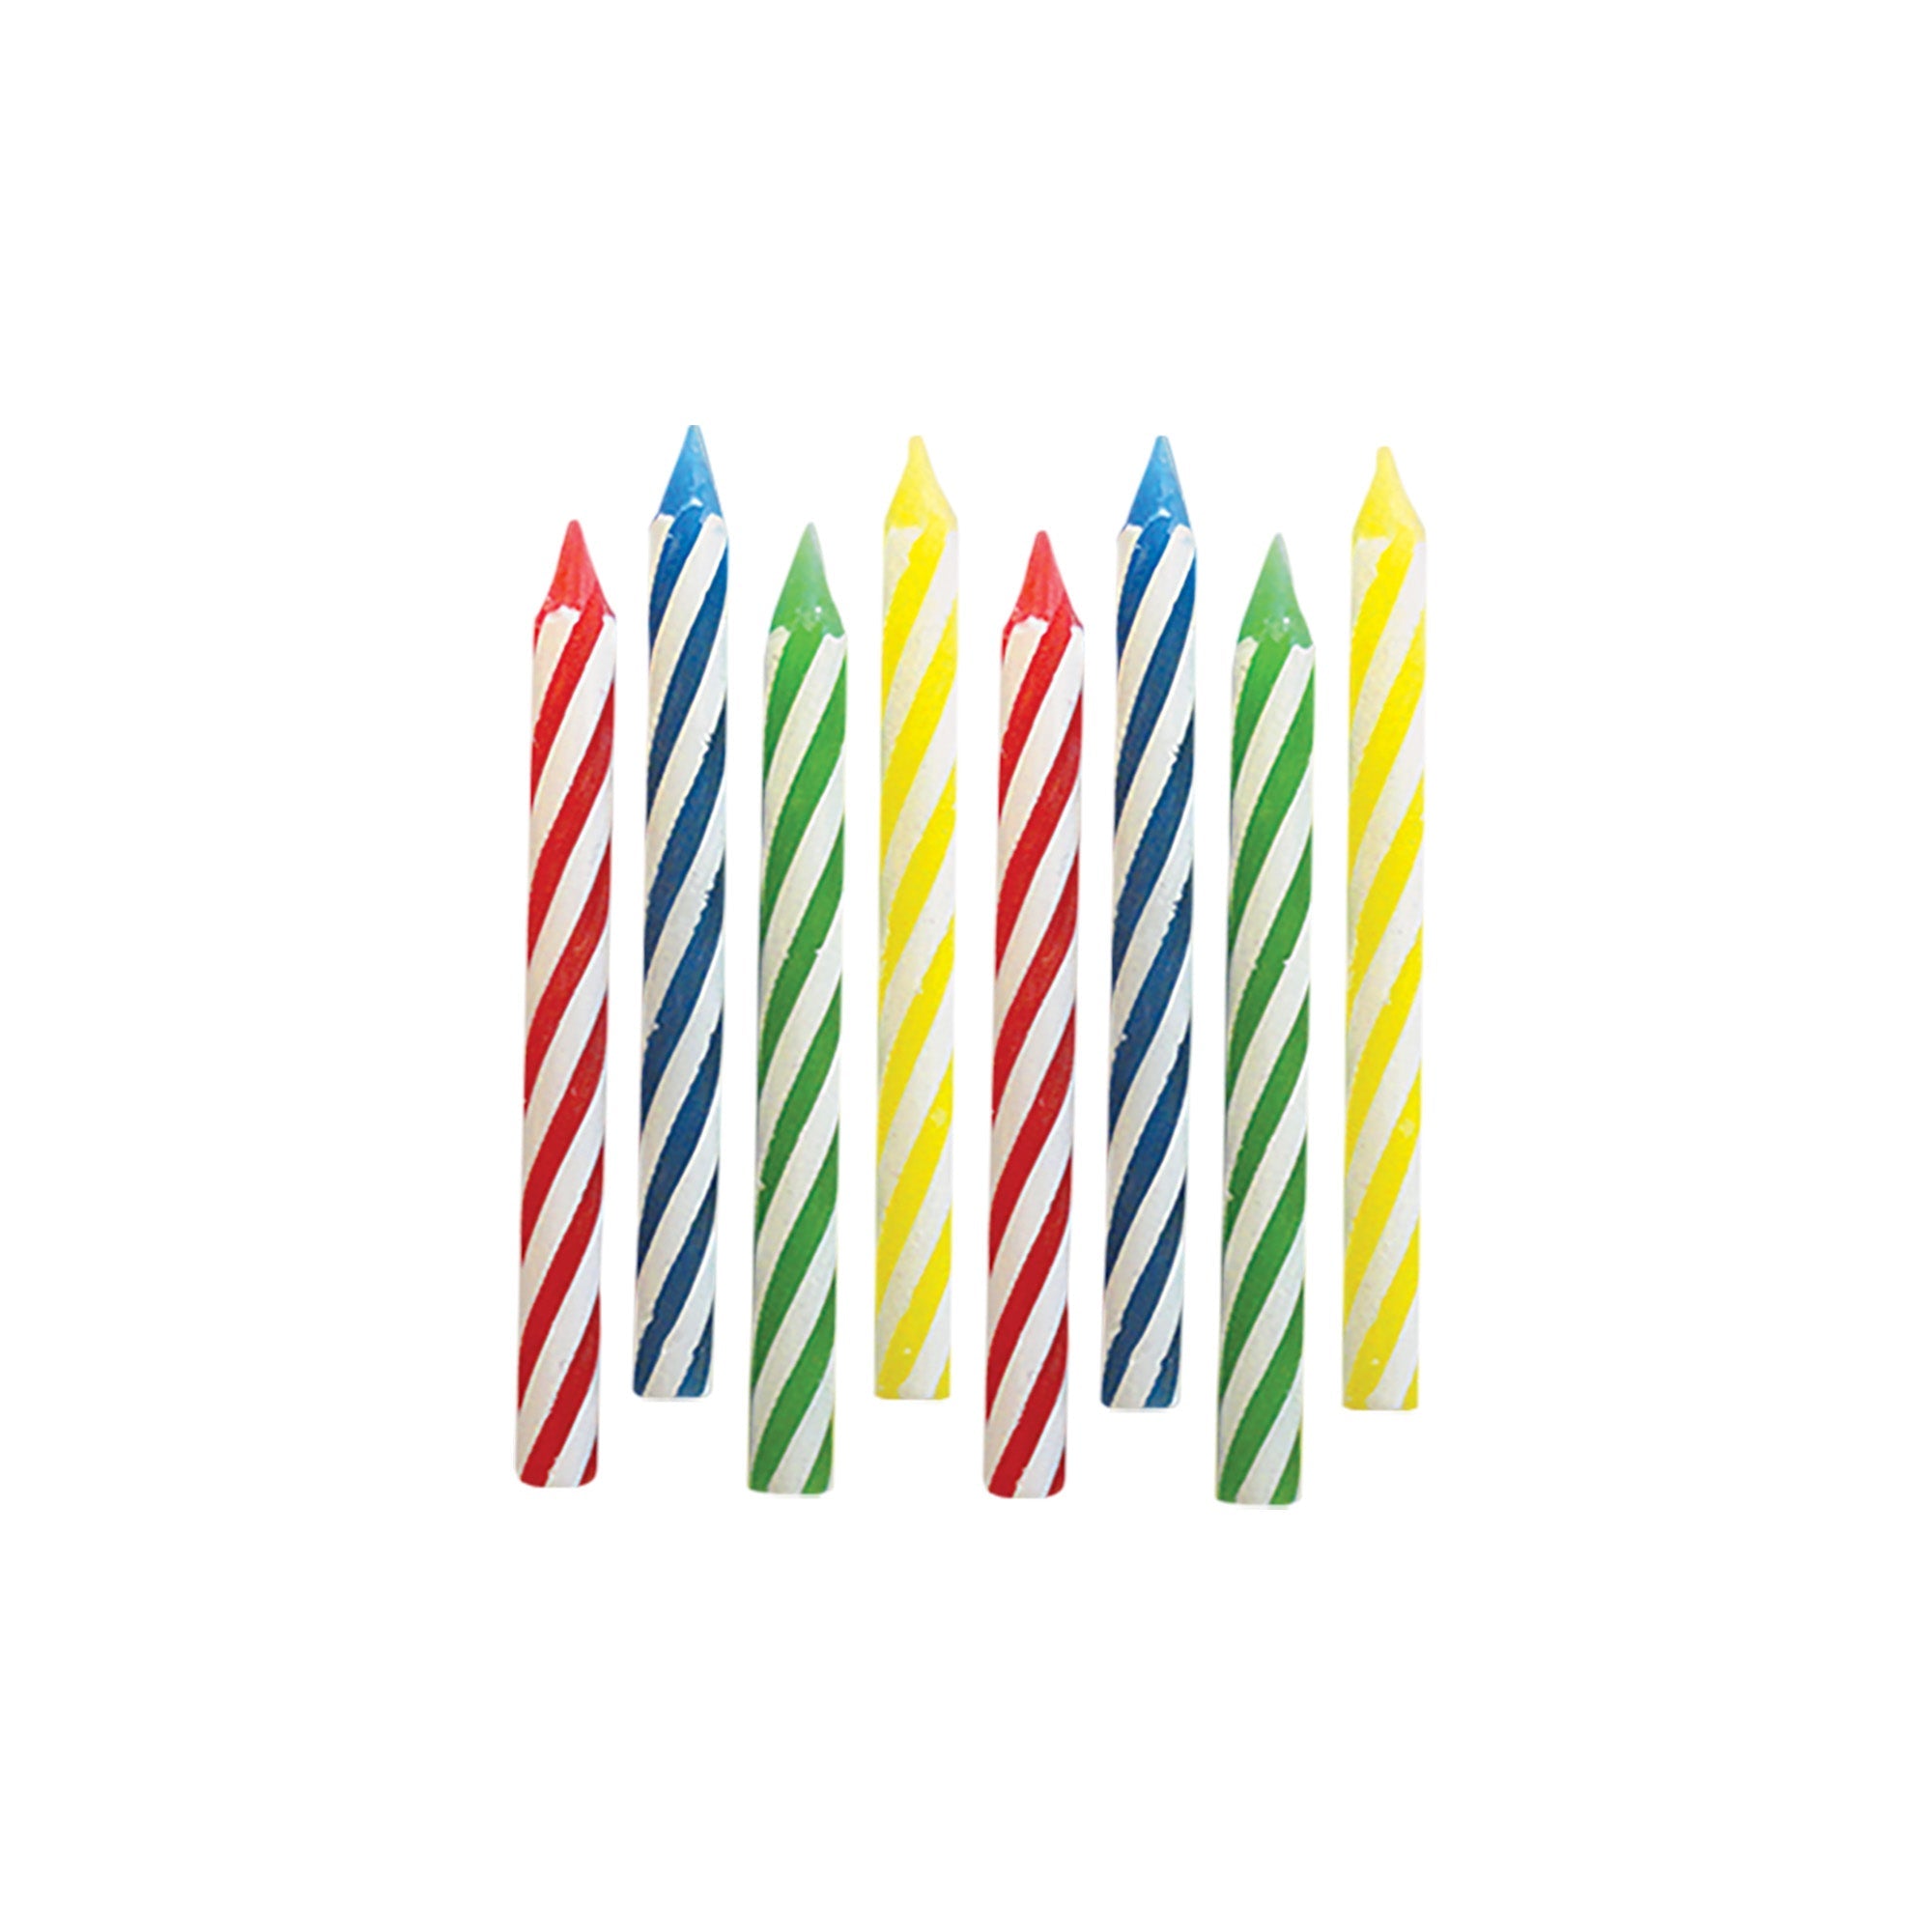 Birthday Candle Primary color spiral design 2 1/2" assortment